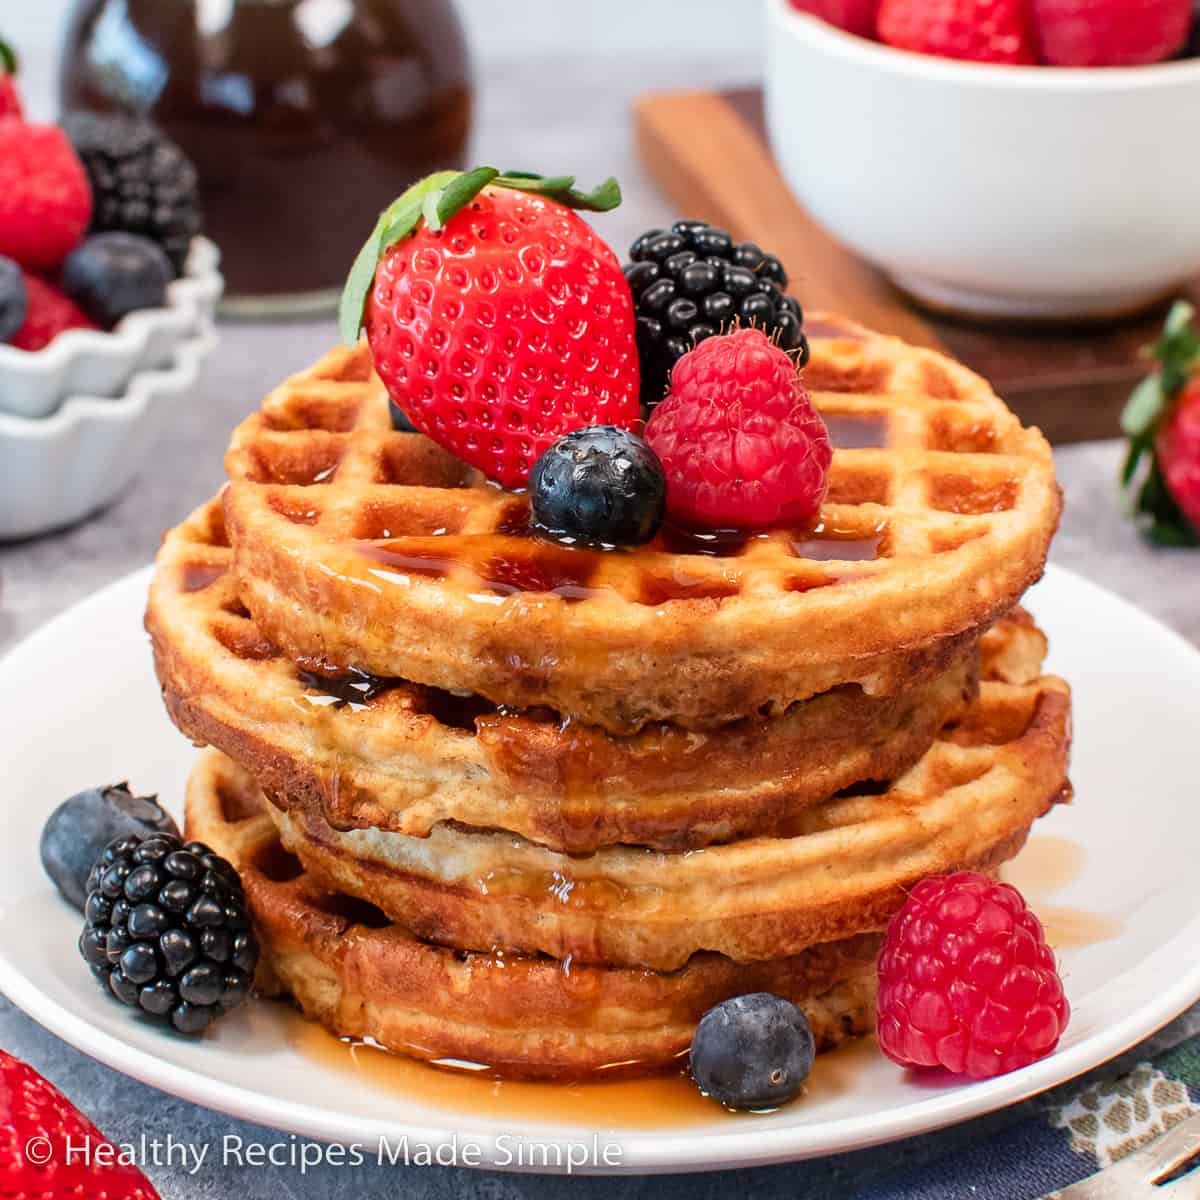 A stack of four waffles on a plate with syrup and fresh fruit on top.